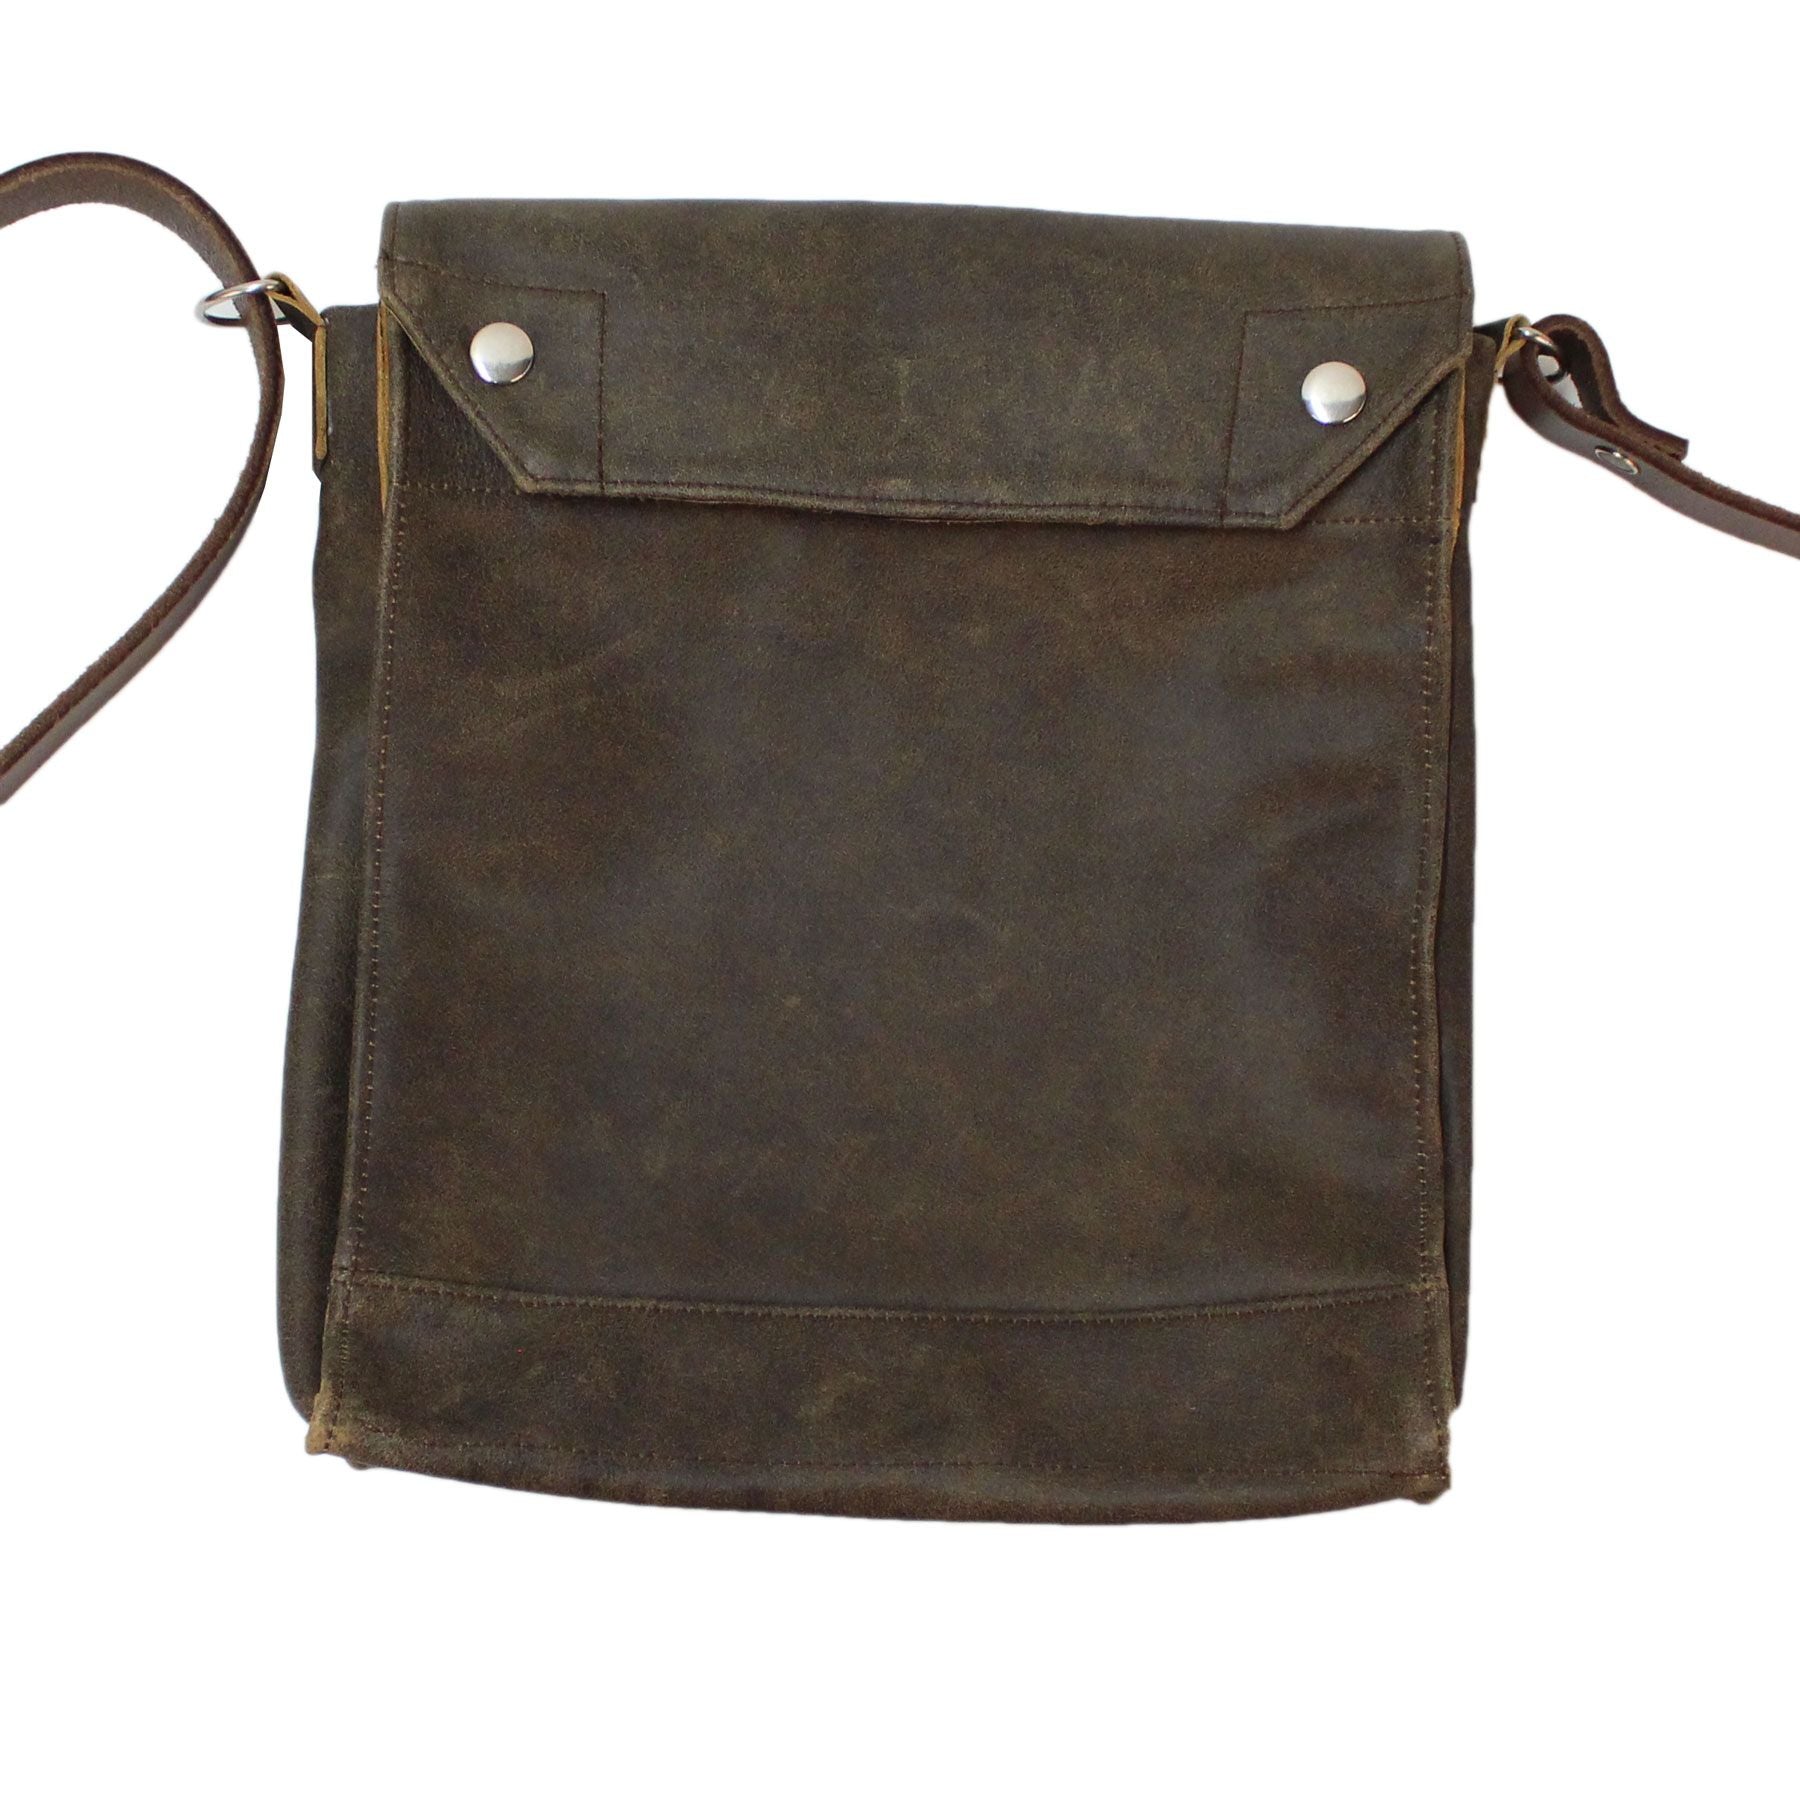 Indy Adventure Bag – Wested Leather Co